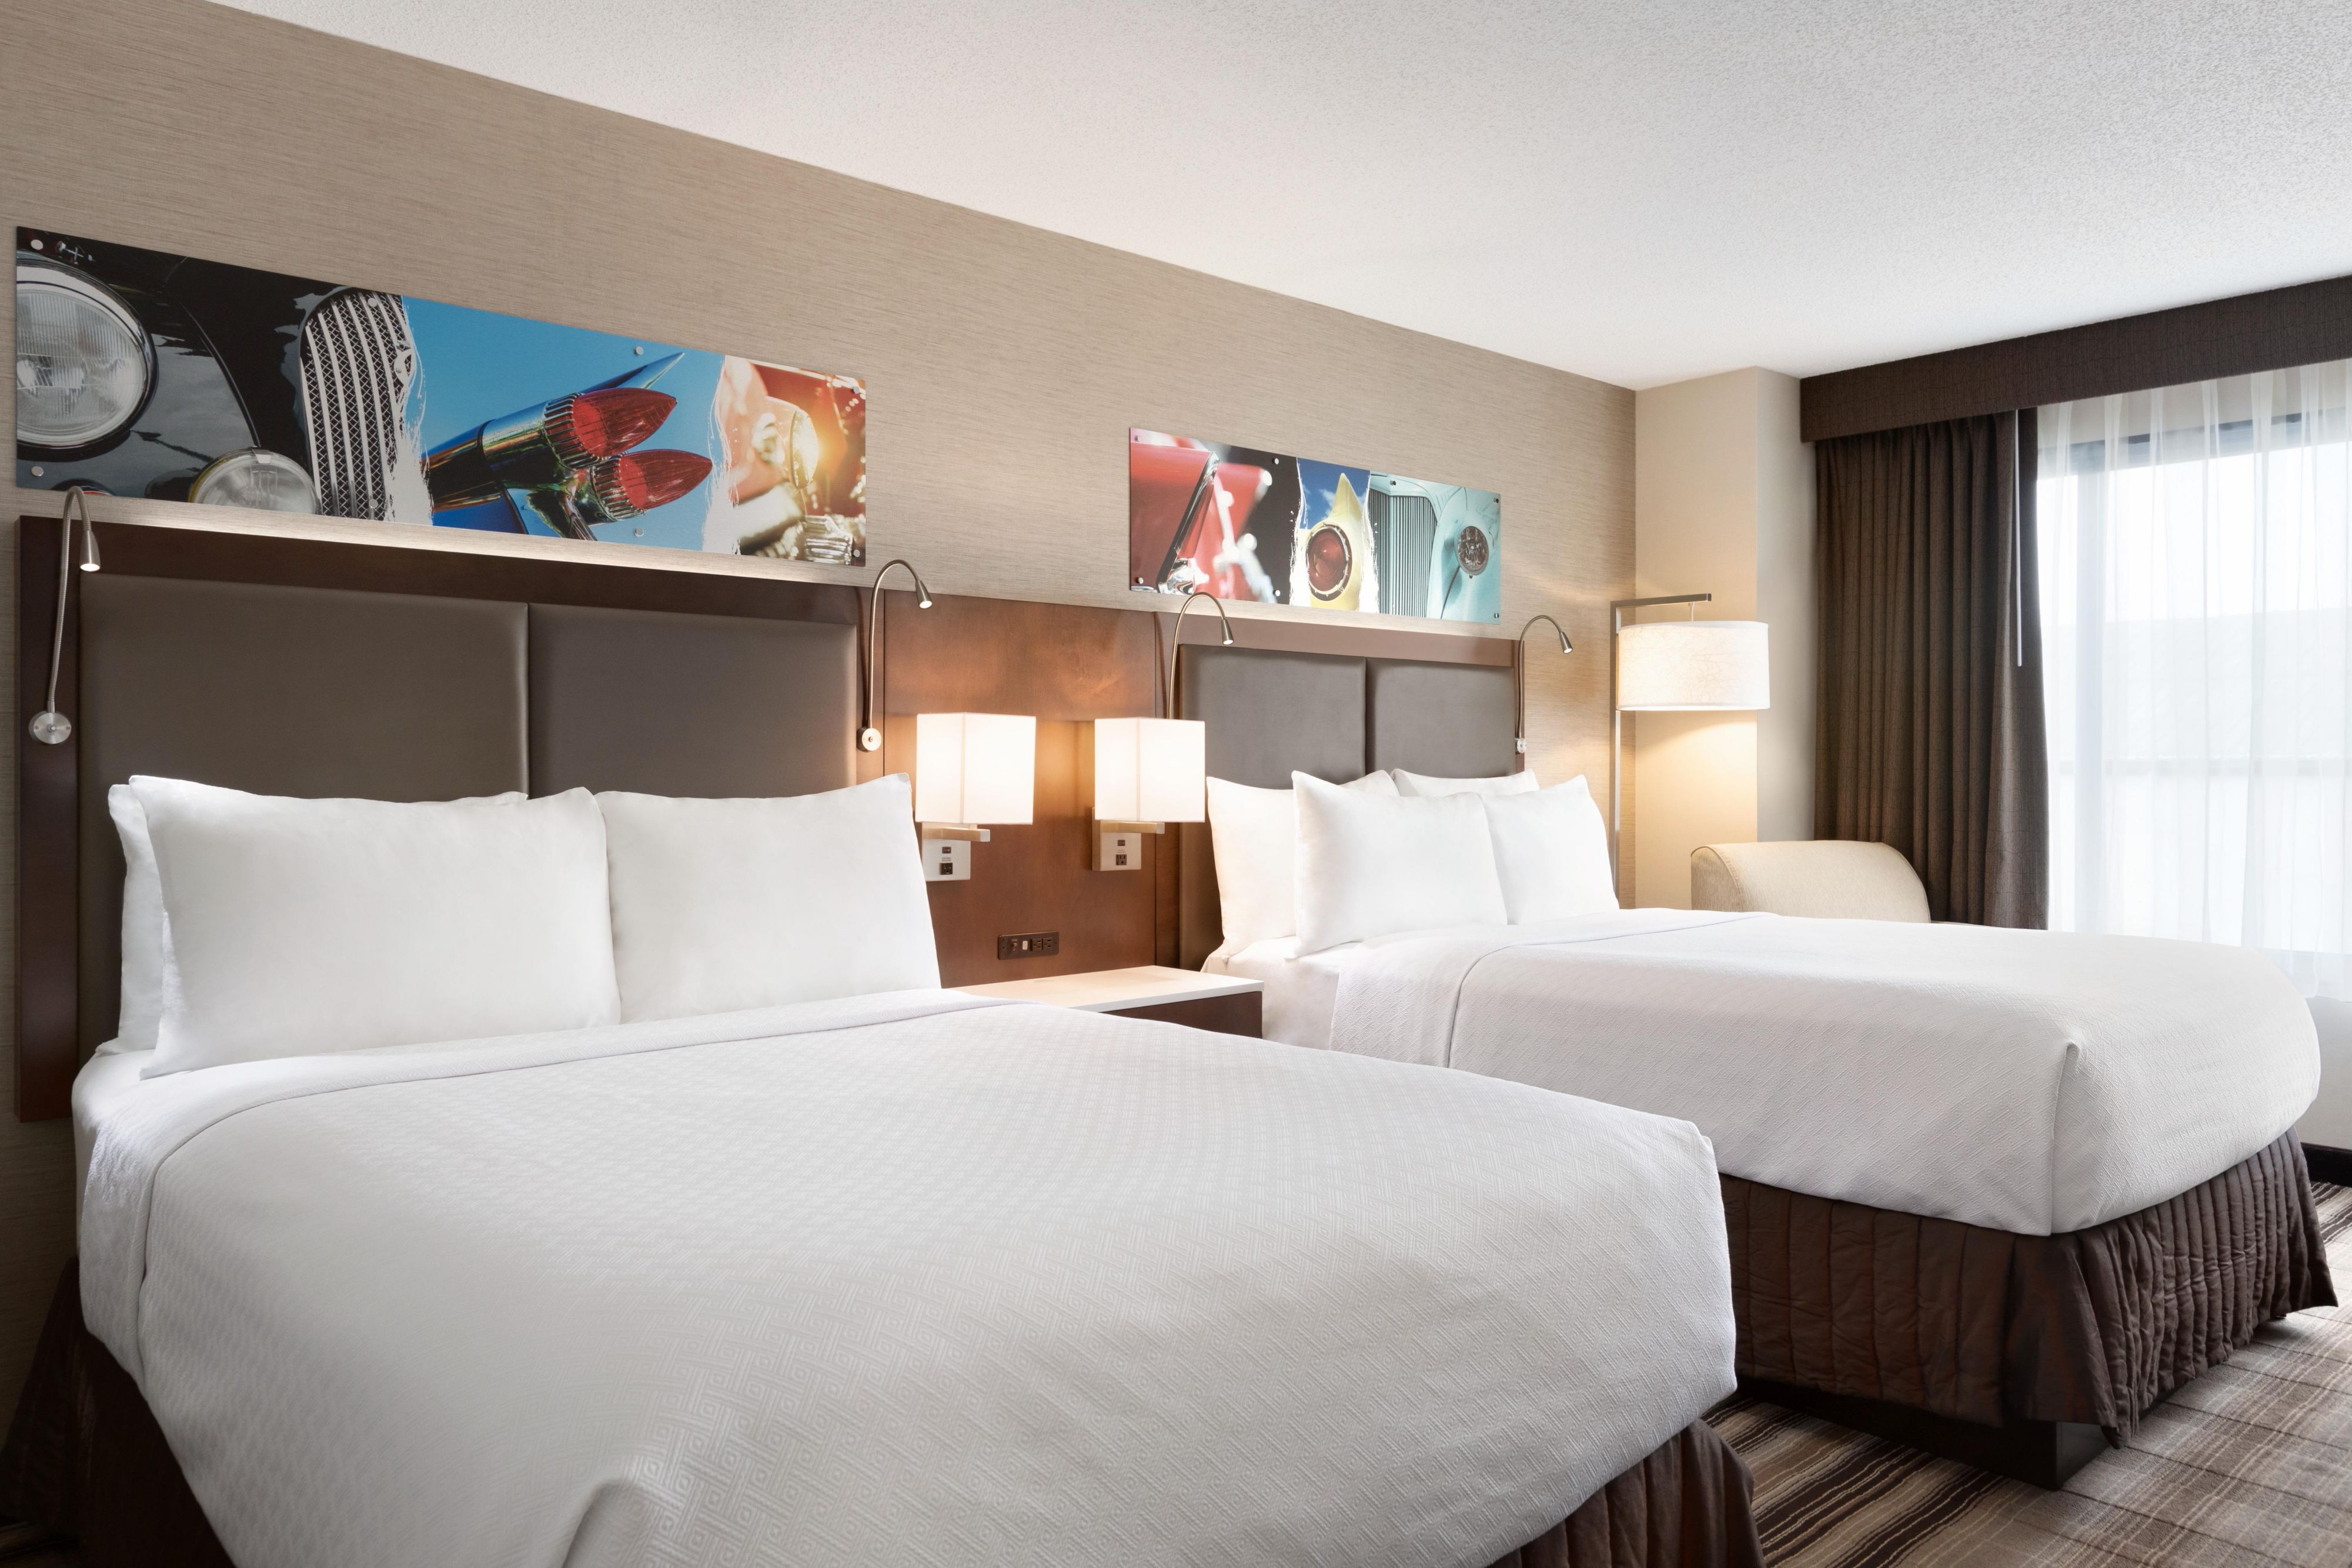 Executive guest rooms feature modern comfort and furnishings.